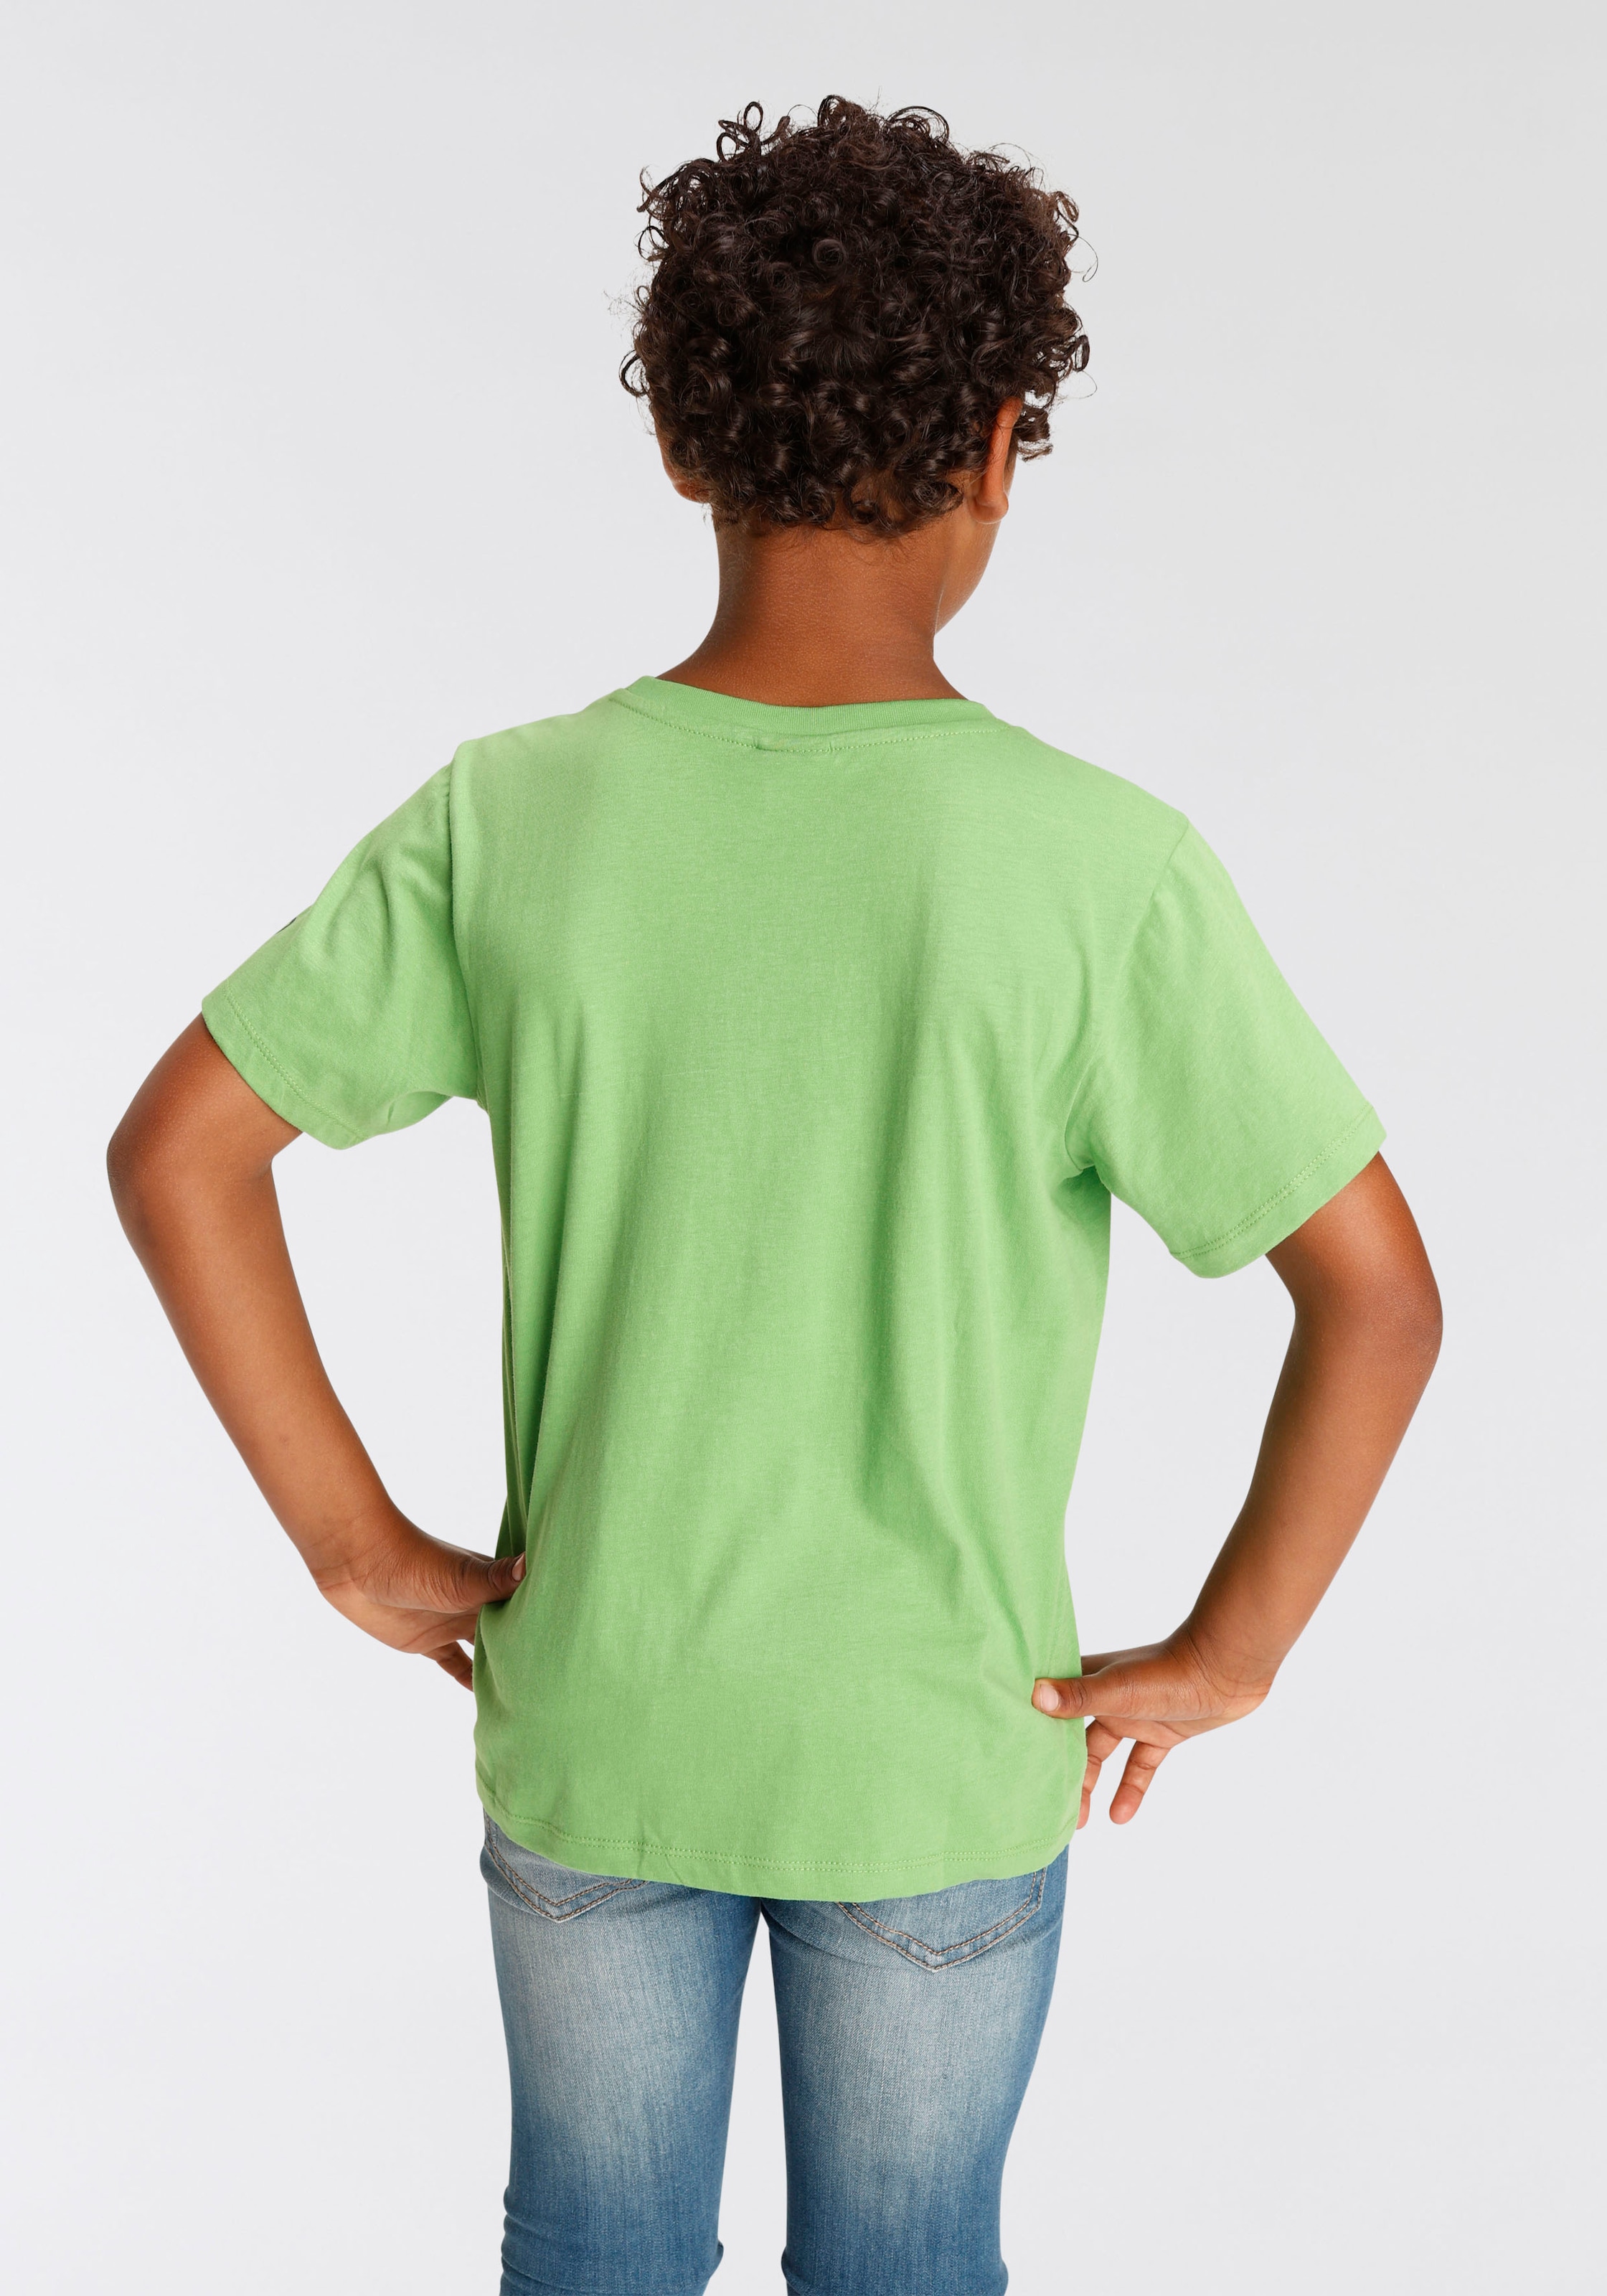 »TOMORROW T-Shirt TOO bei Spruch IS KIDSWORLD LATE«,